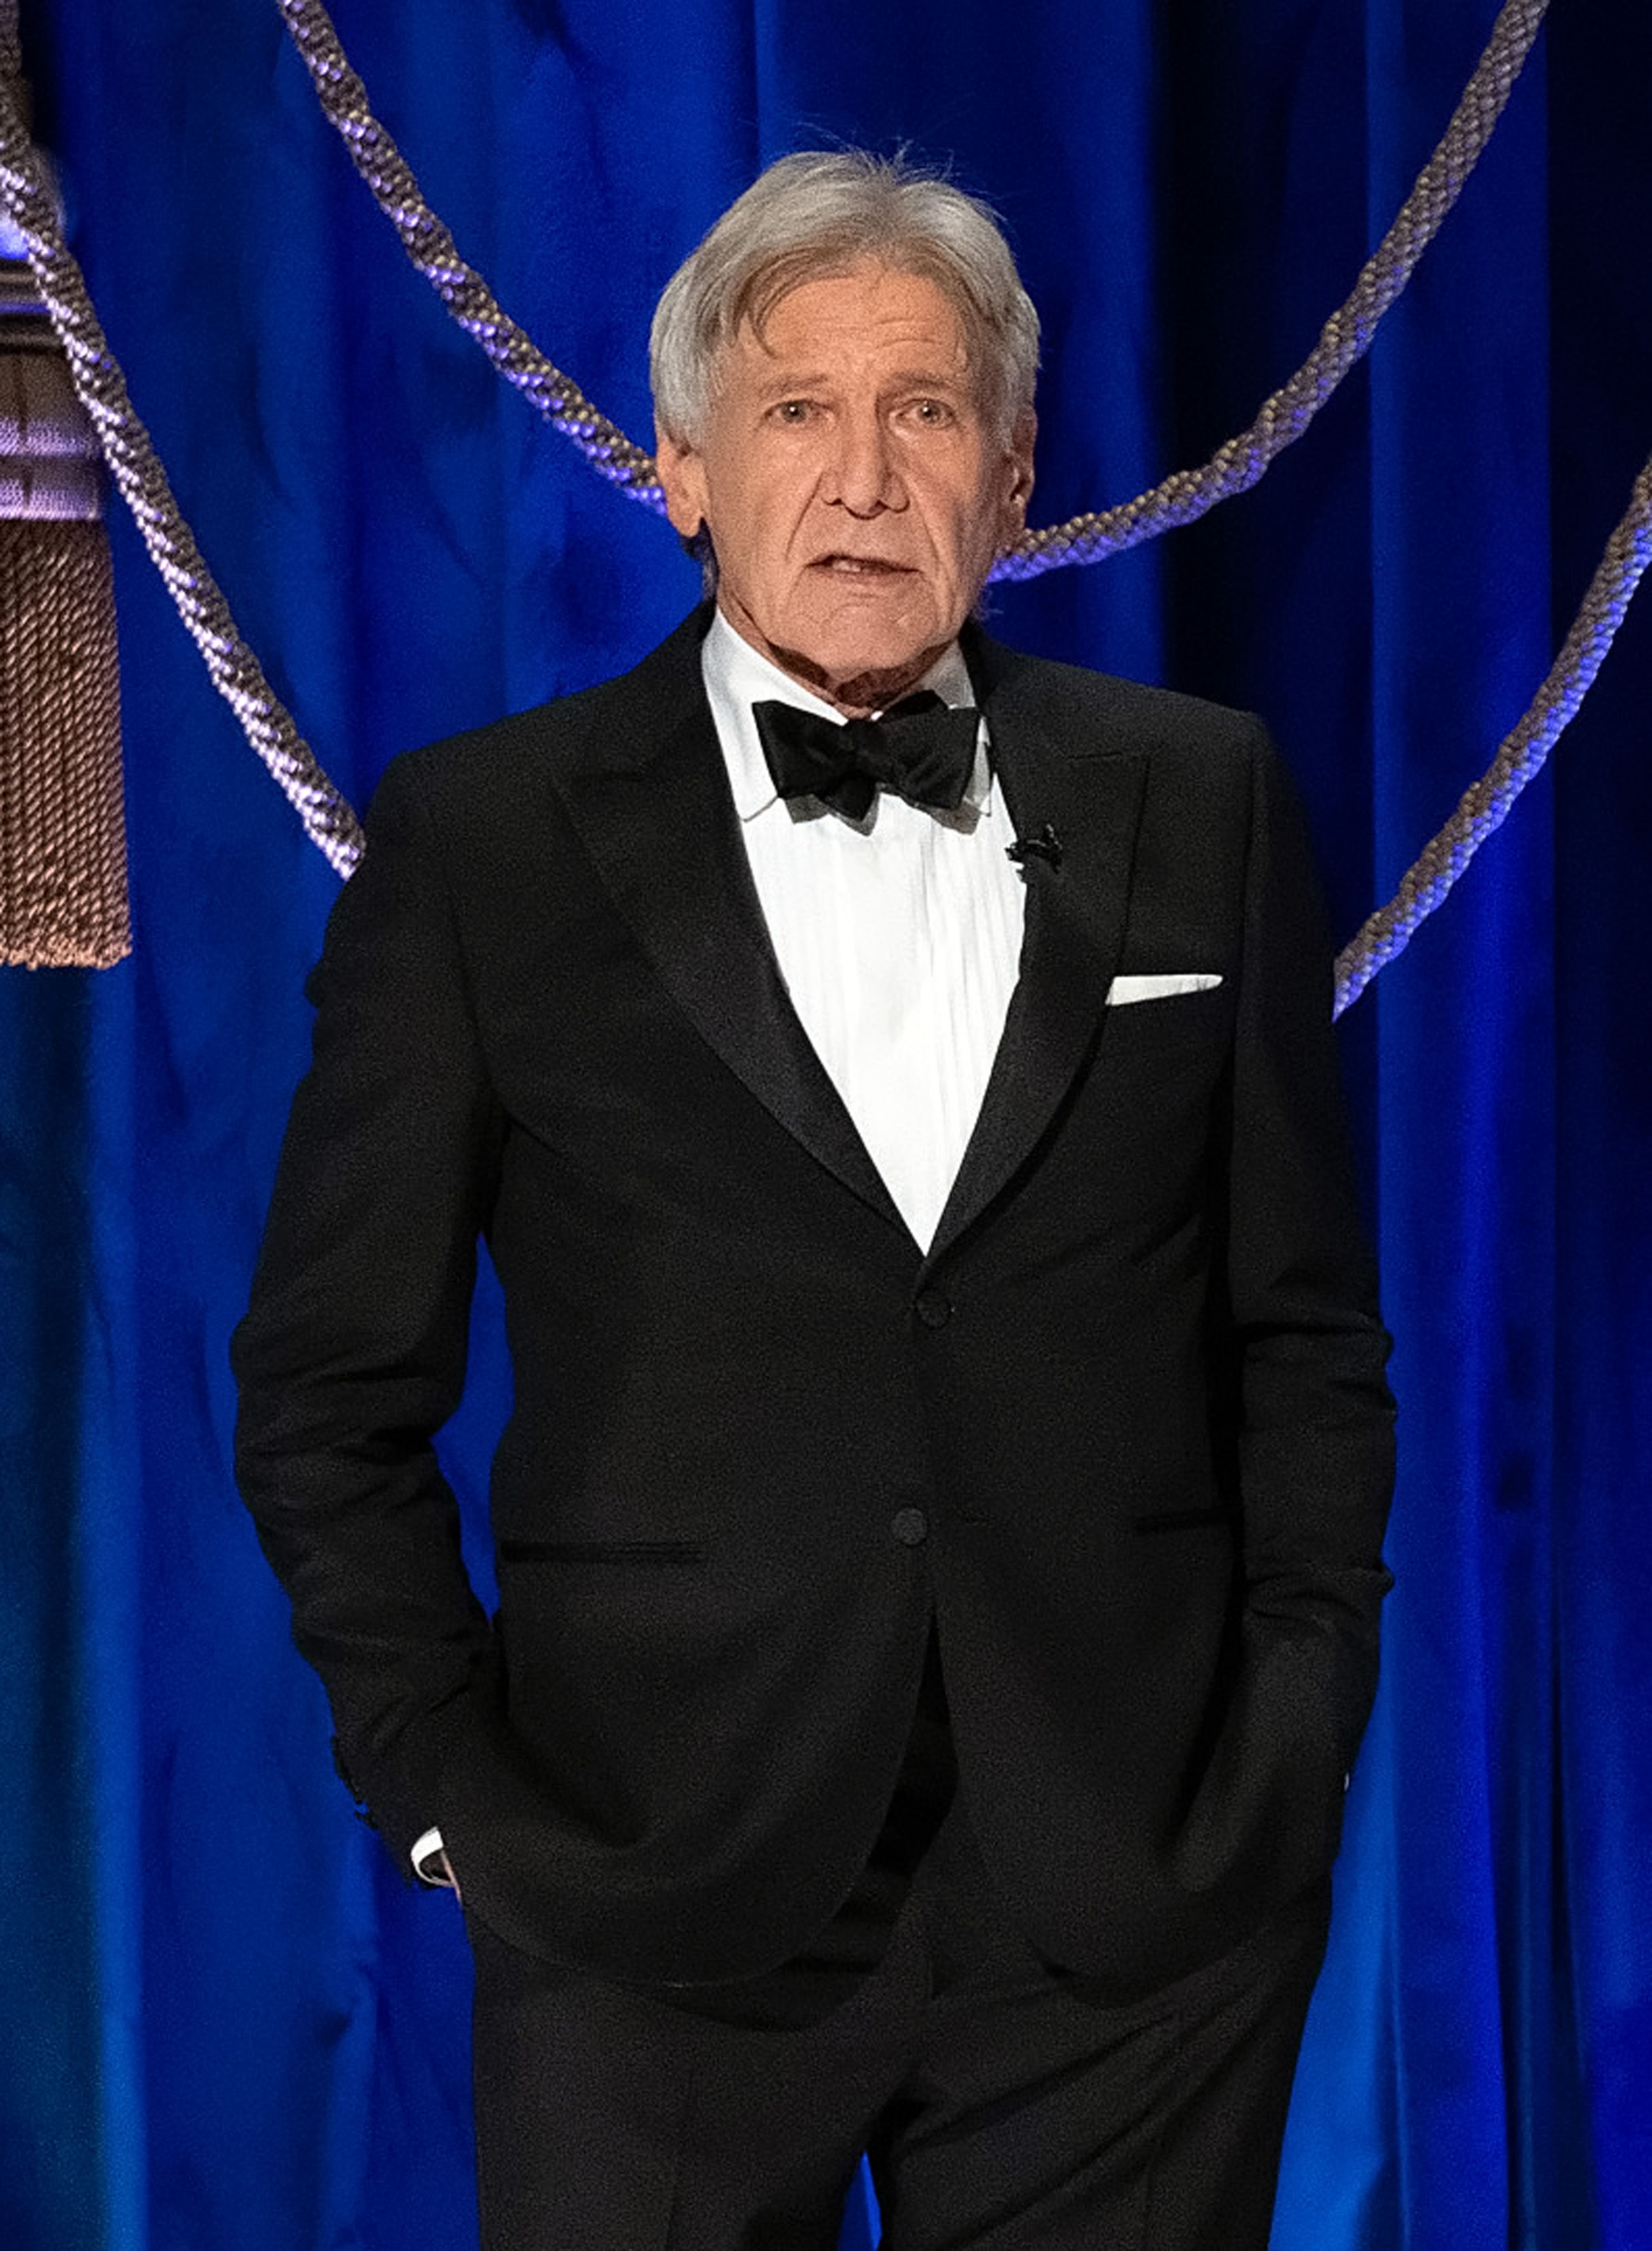 Harrison Ford during the 93rd Annual Academy Awards on April 25, 2021, in Los Angeles, California. | Source: Todd Wawrychuk/A.M.P.A.S./Getty Images